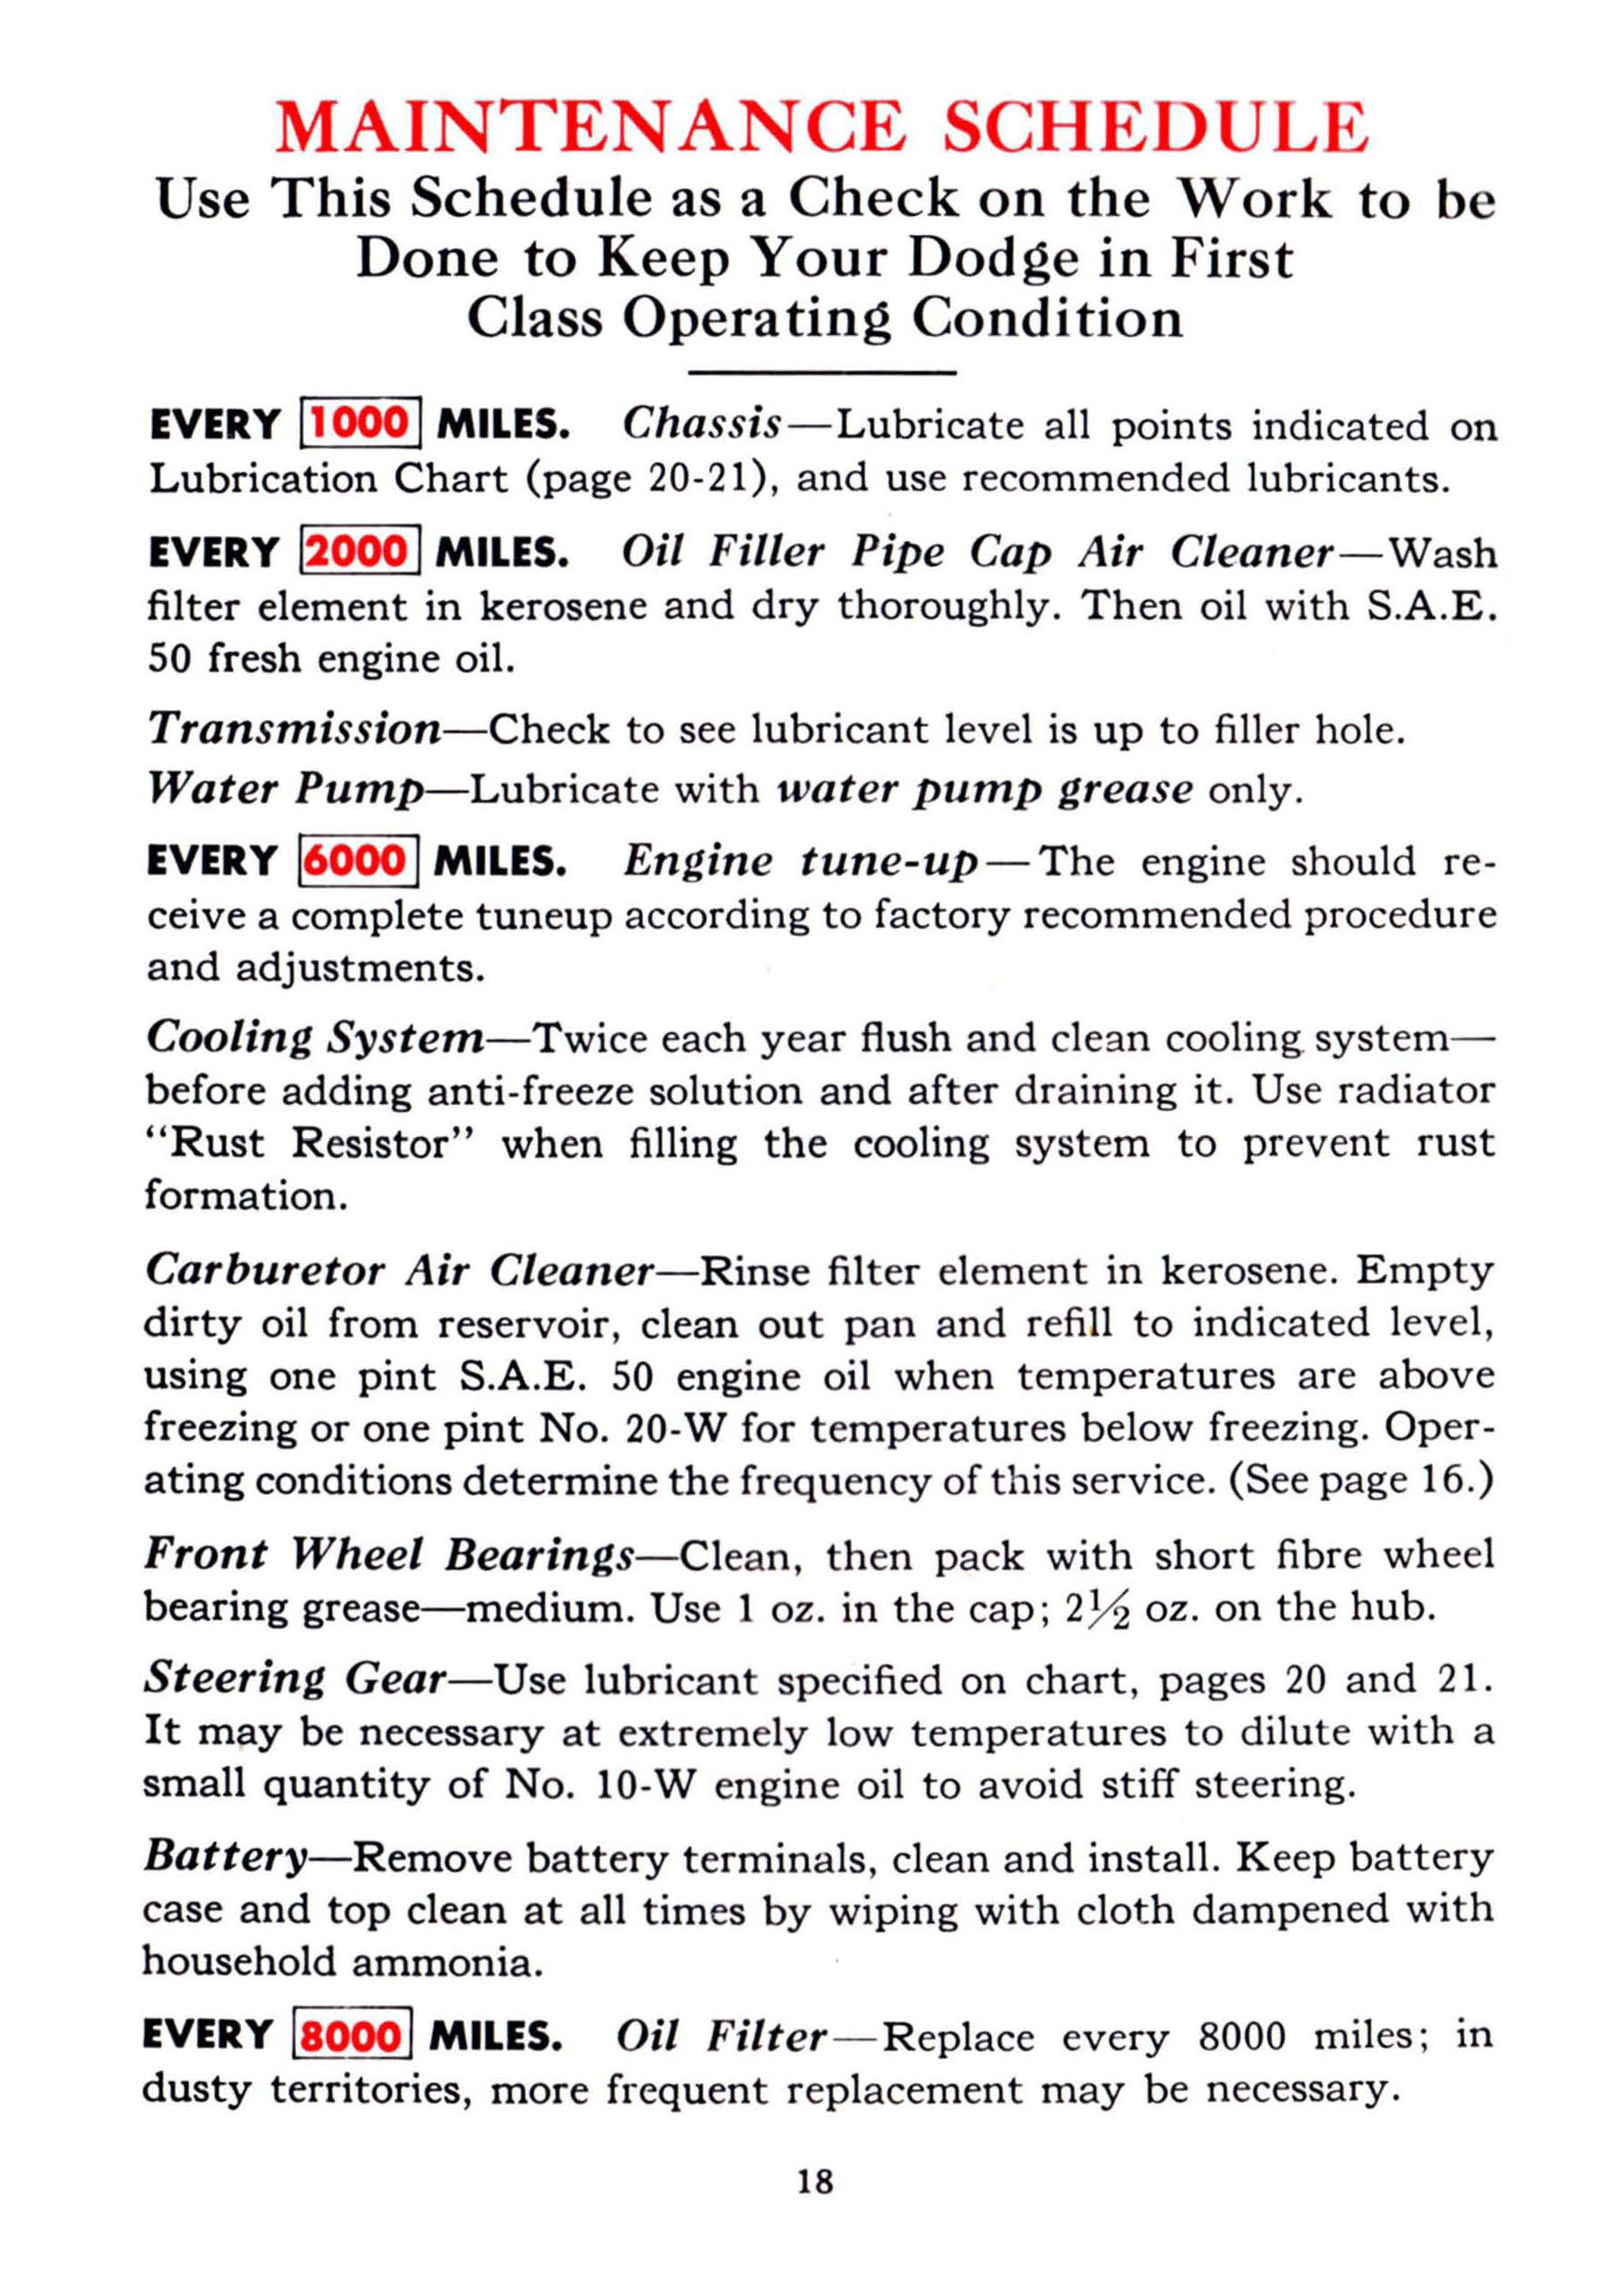 1941_Dodge_Owners_Manual-18